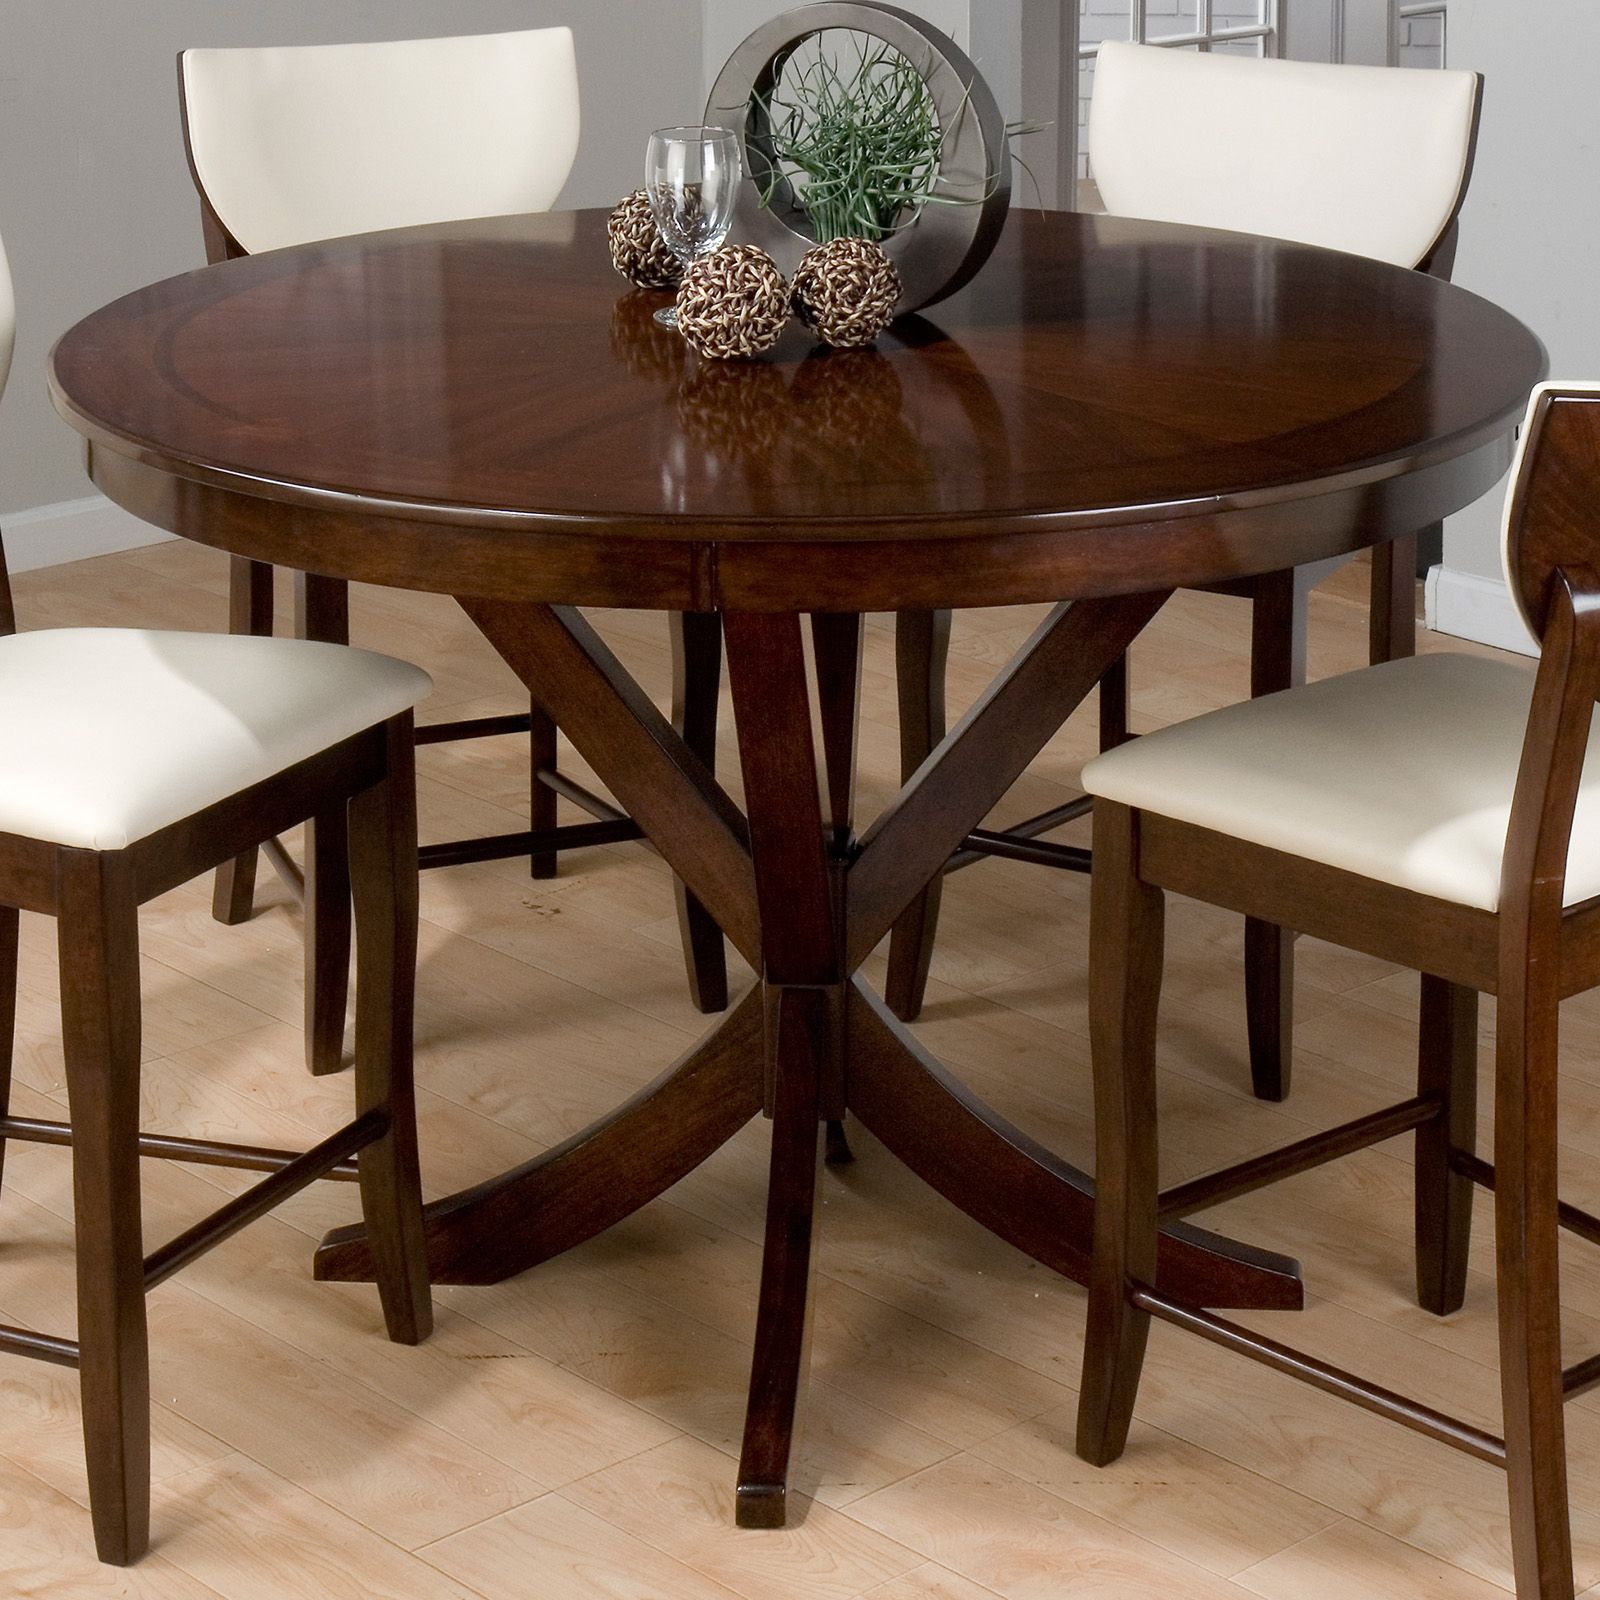 Jofran Satin Street Round Counter Height Table At Hayneedle In Widely Used Liesel Bar Height Pedestal Dining Tables (View 11 of 20)